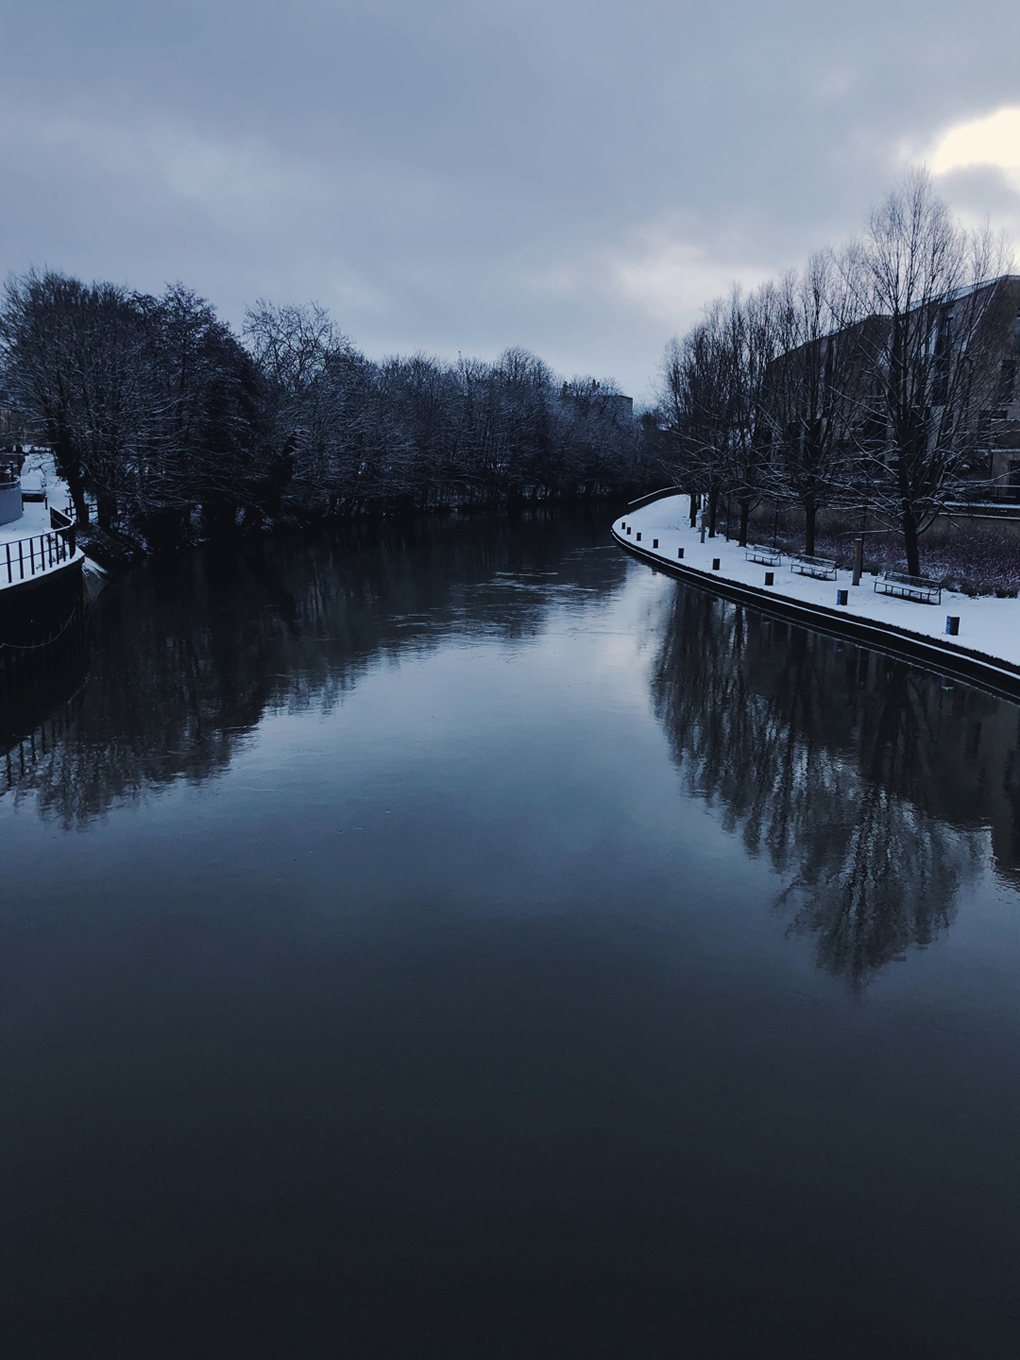 The a view from Victoria Bridge of the River Avon hemmed in by snow-laden paths.